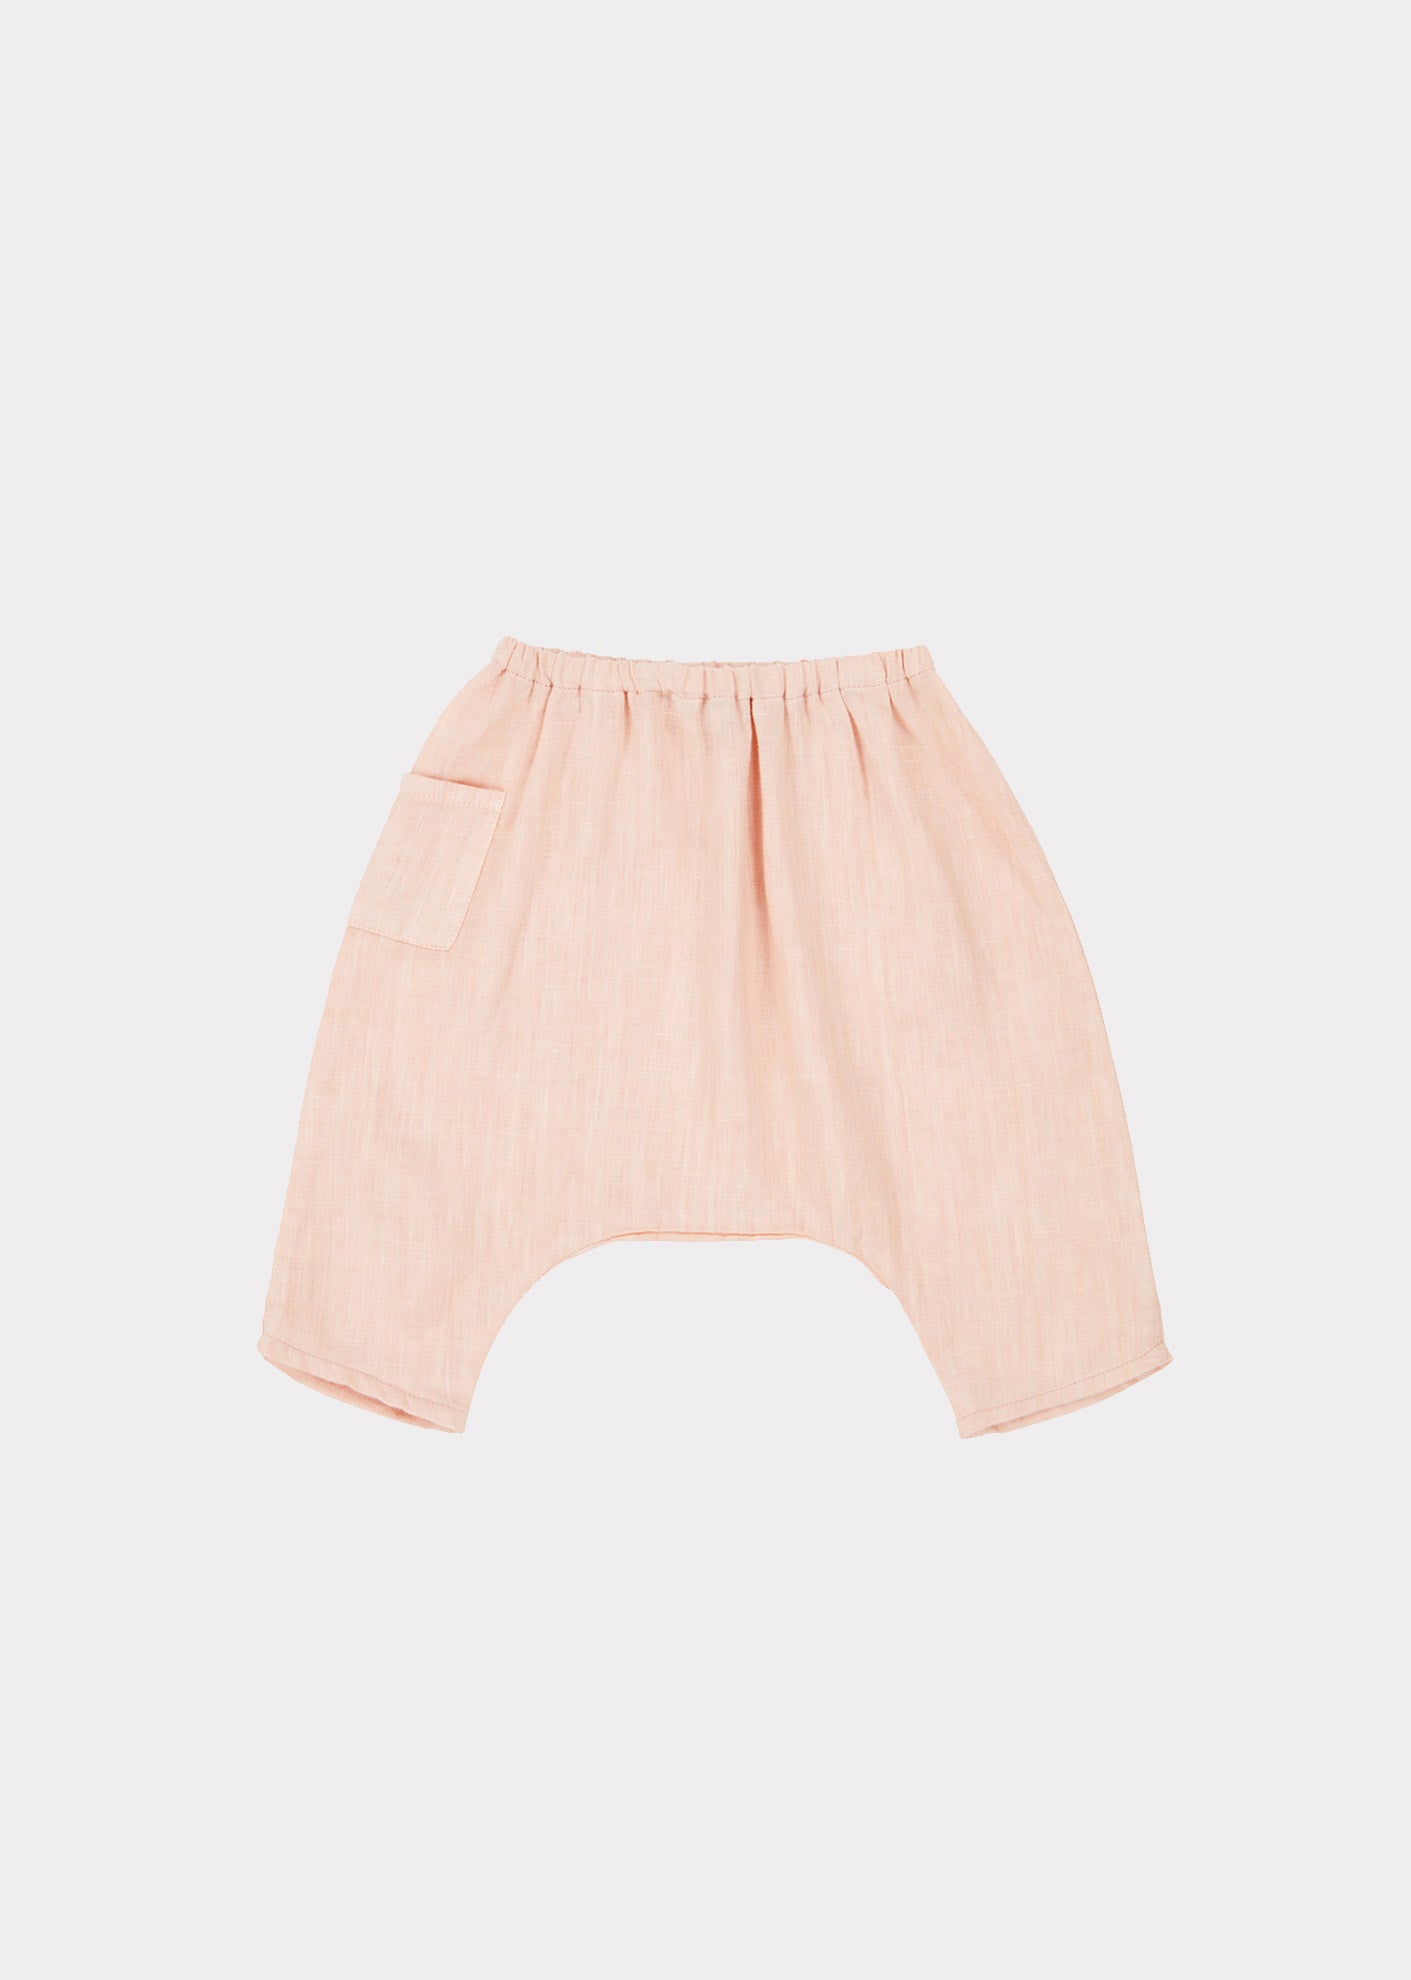 Baby Girls Pink Trousers